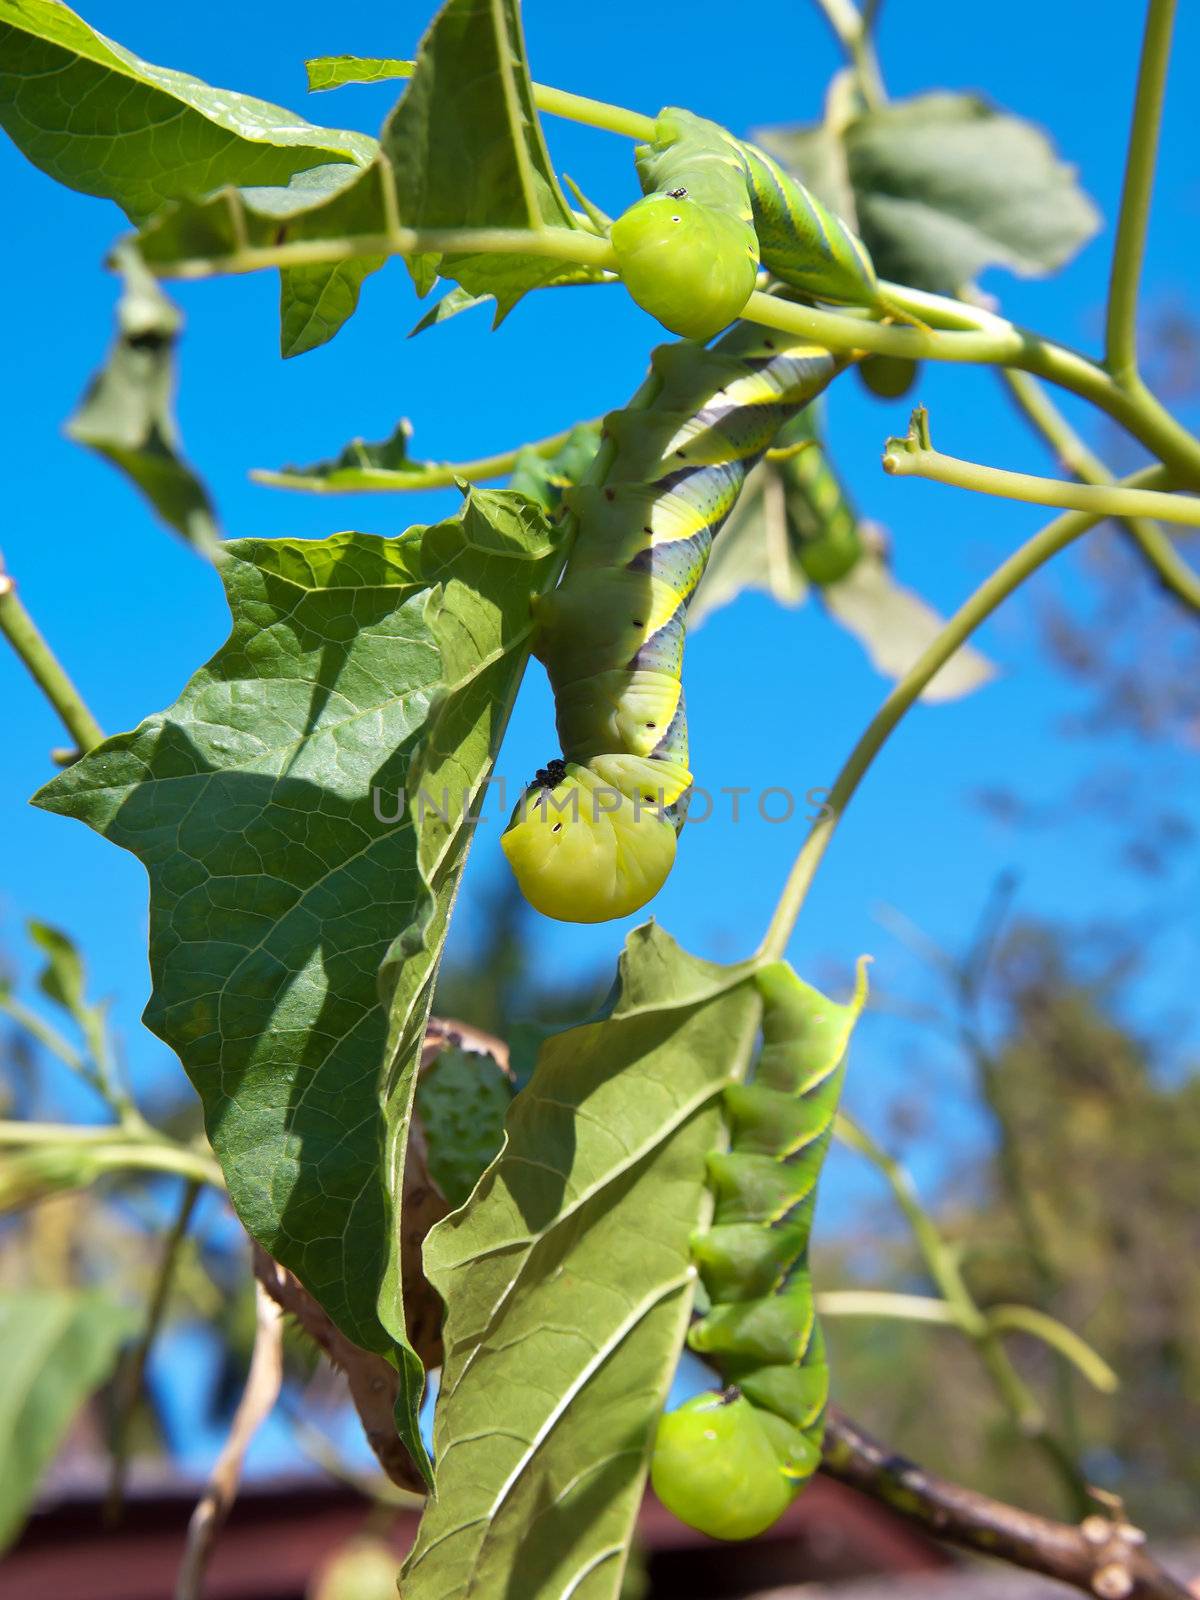 Green fruitworms damage to leafs, larva stage of butterfly or moth.